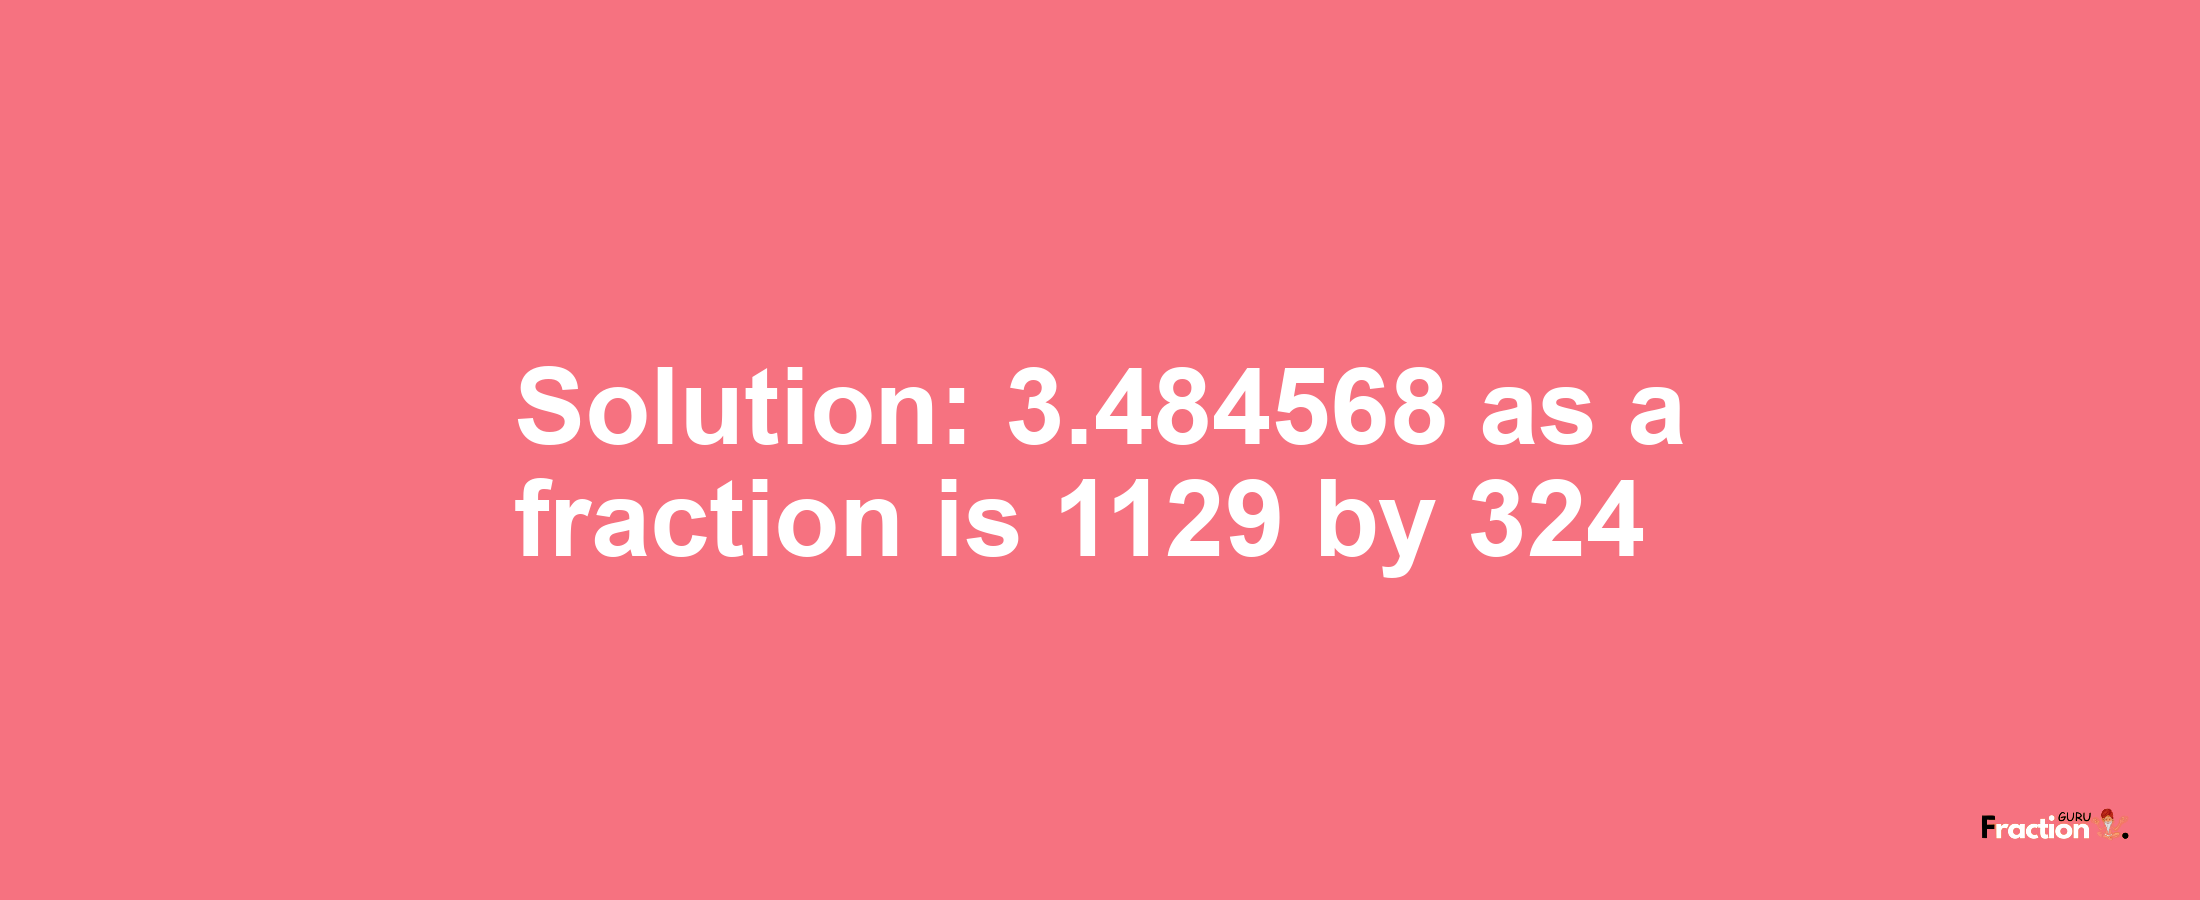 Solution:3.484568 as a fraction is 1129/324